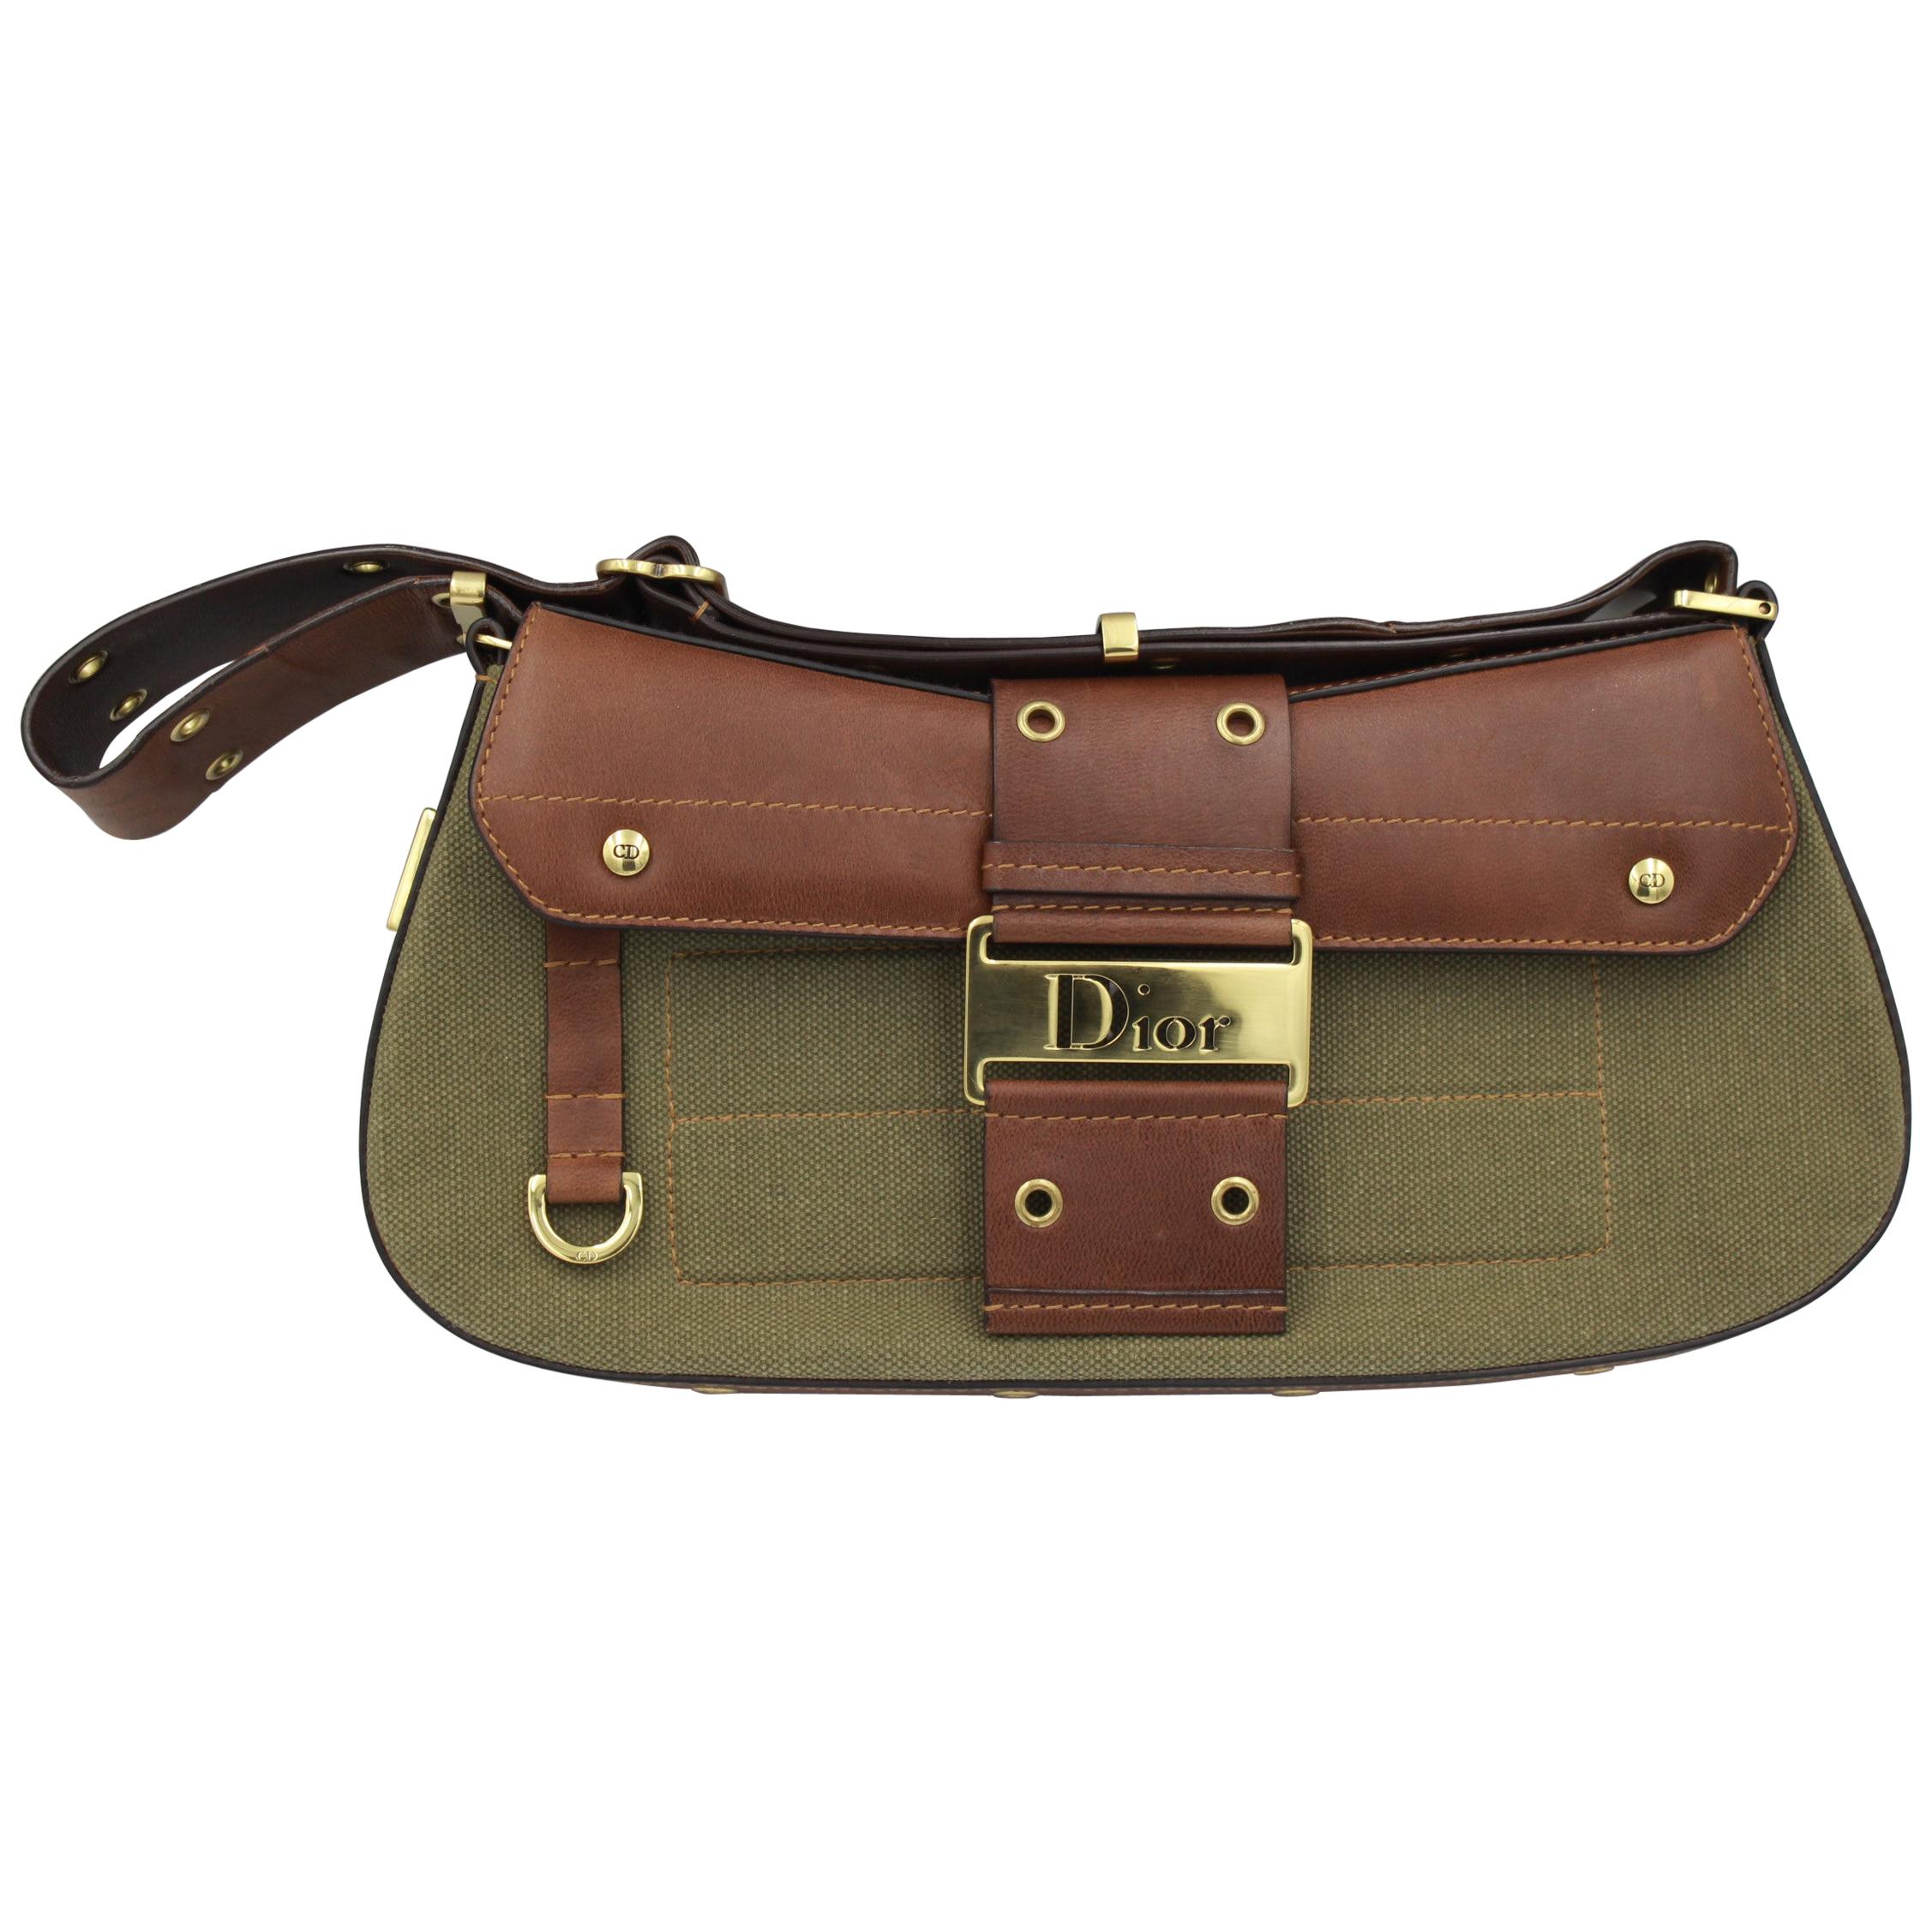 Christian Dior in Canvas and Brown Leather Street Chic handbag